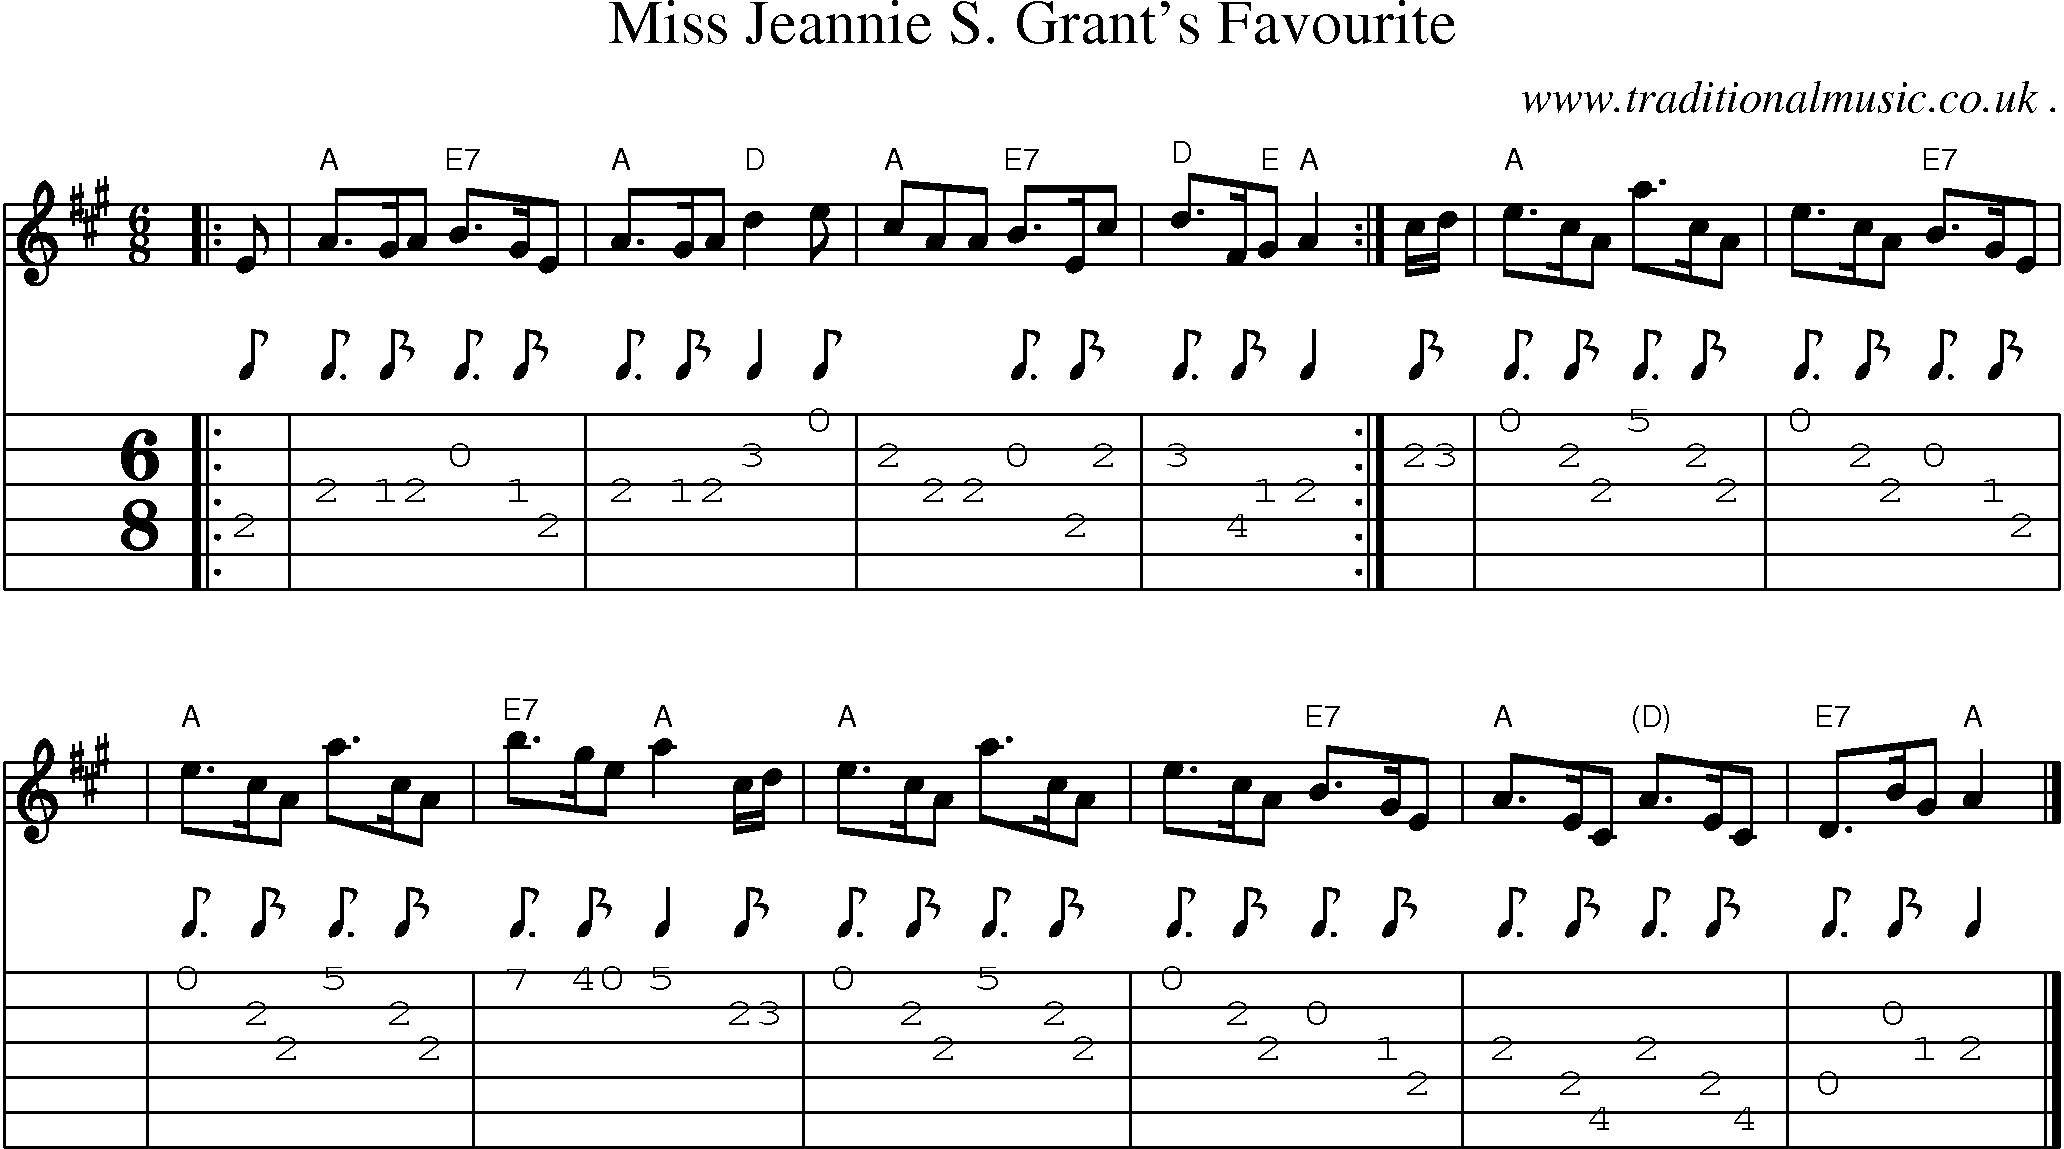 Sheet-music  score, Chords and Guitar Tabs for Miss Jeannie S Grants Favourite